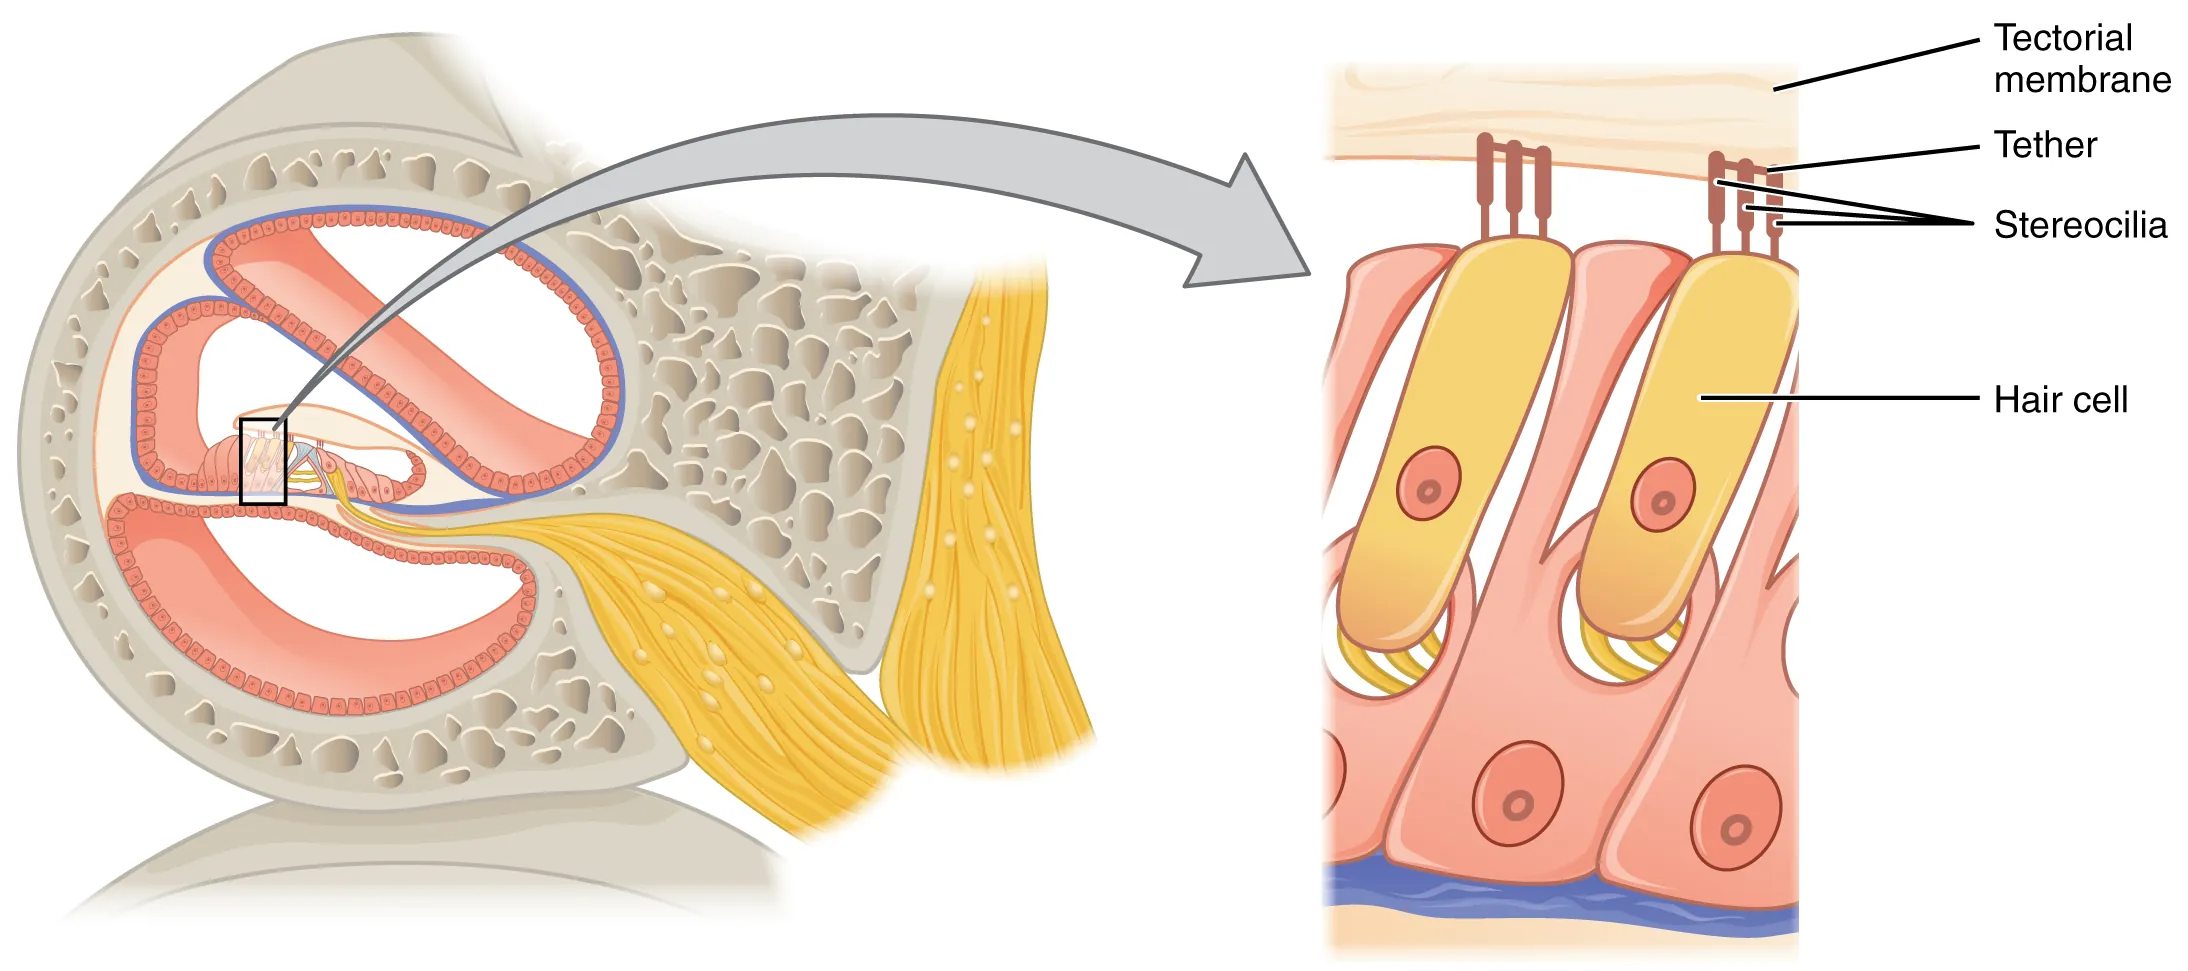 This diagram shows the structure of the hair cell. The right panel shows a magnified view of the hair cell.